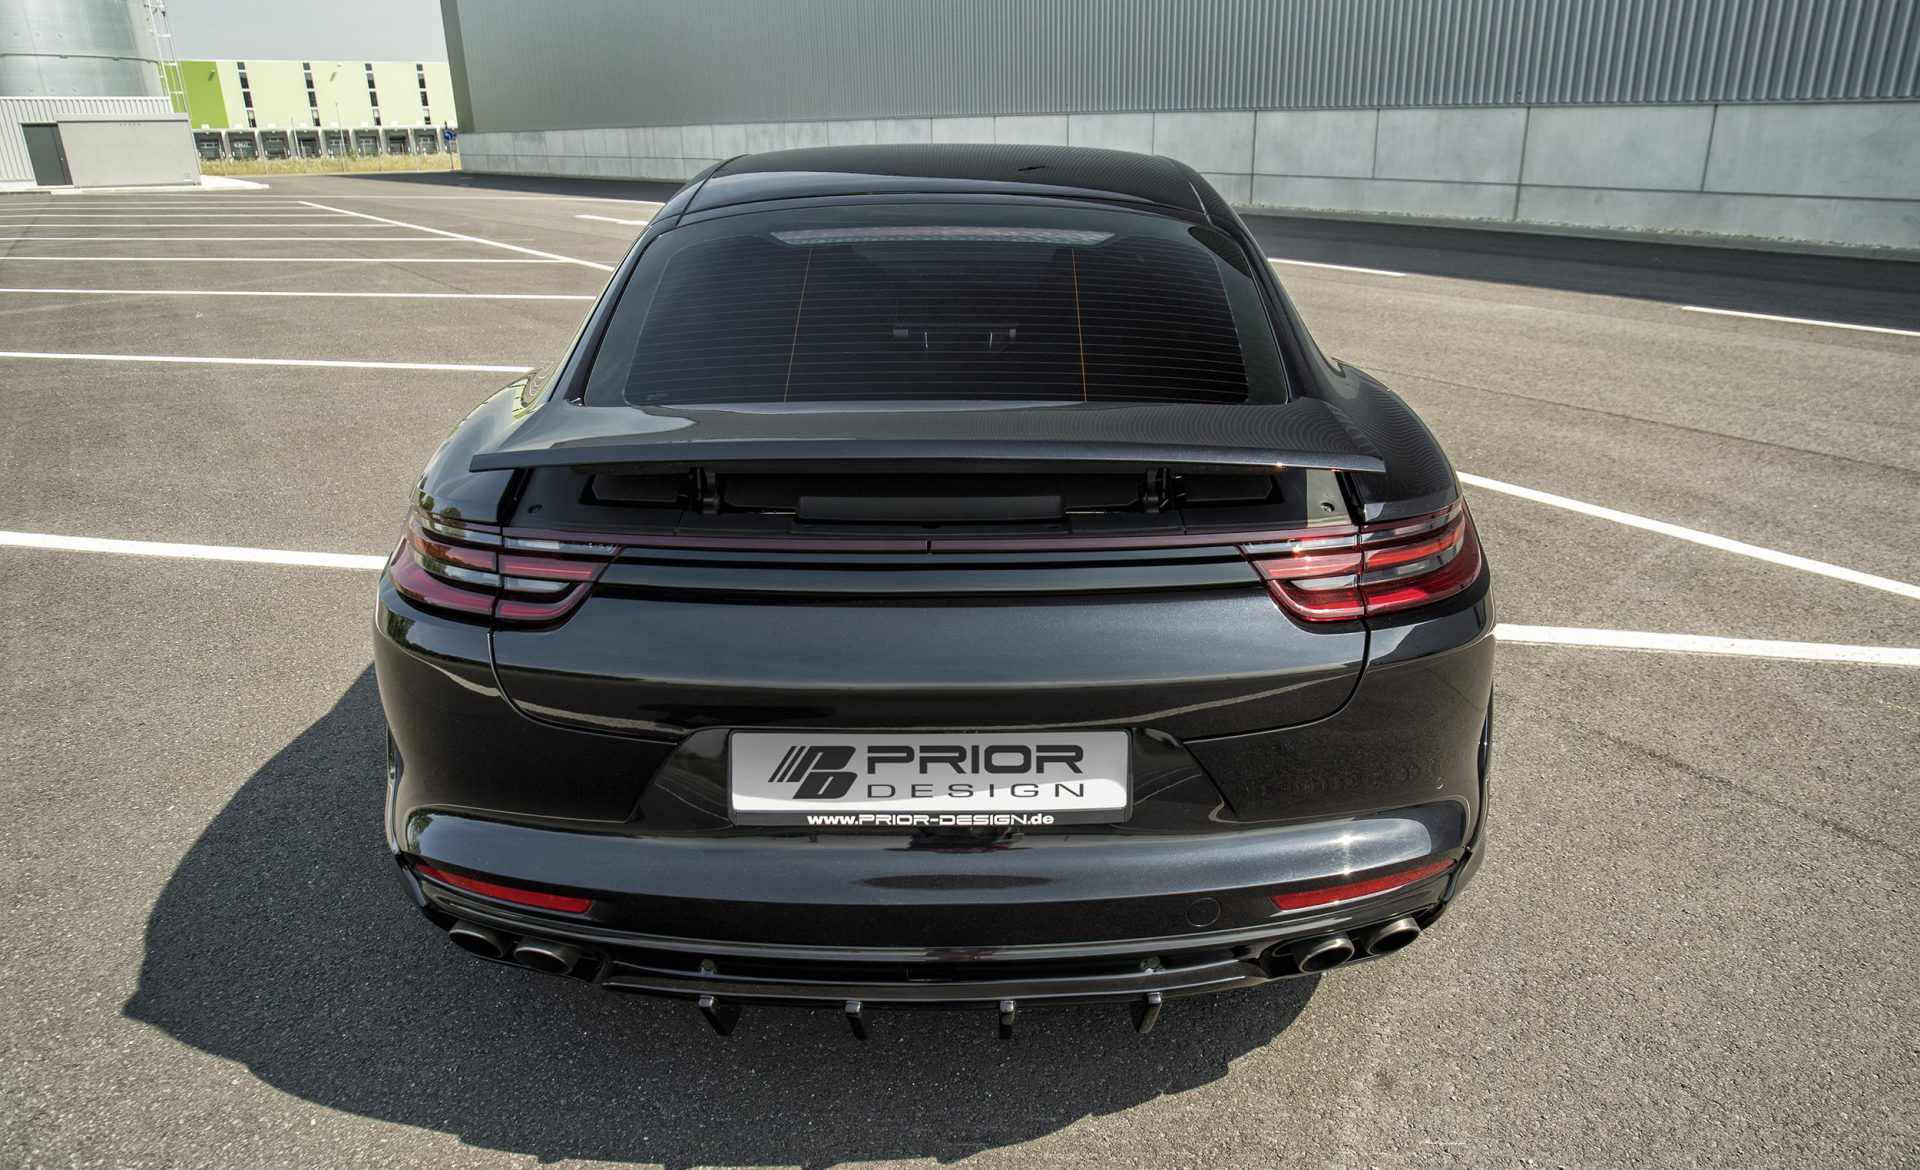 PD971 Diffusor with 4 Fins for Porsche Panamera 971